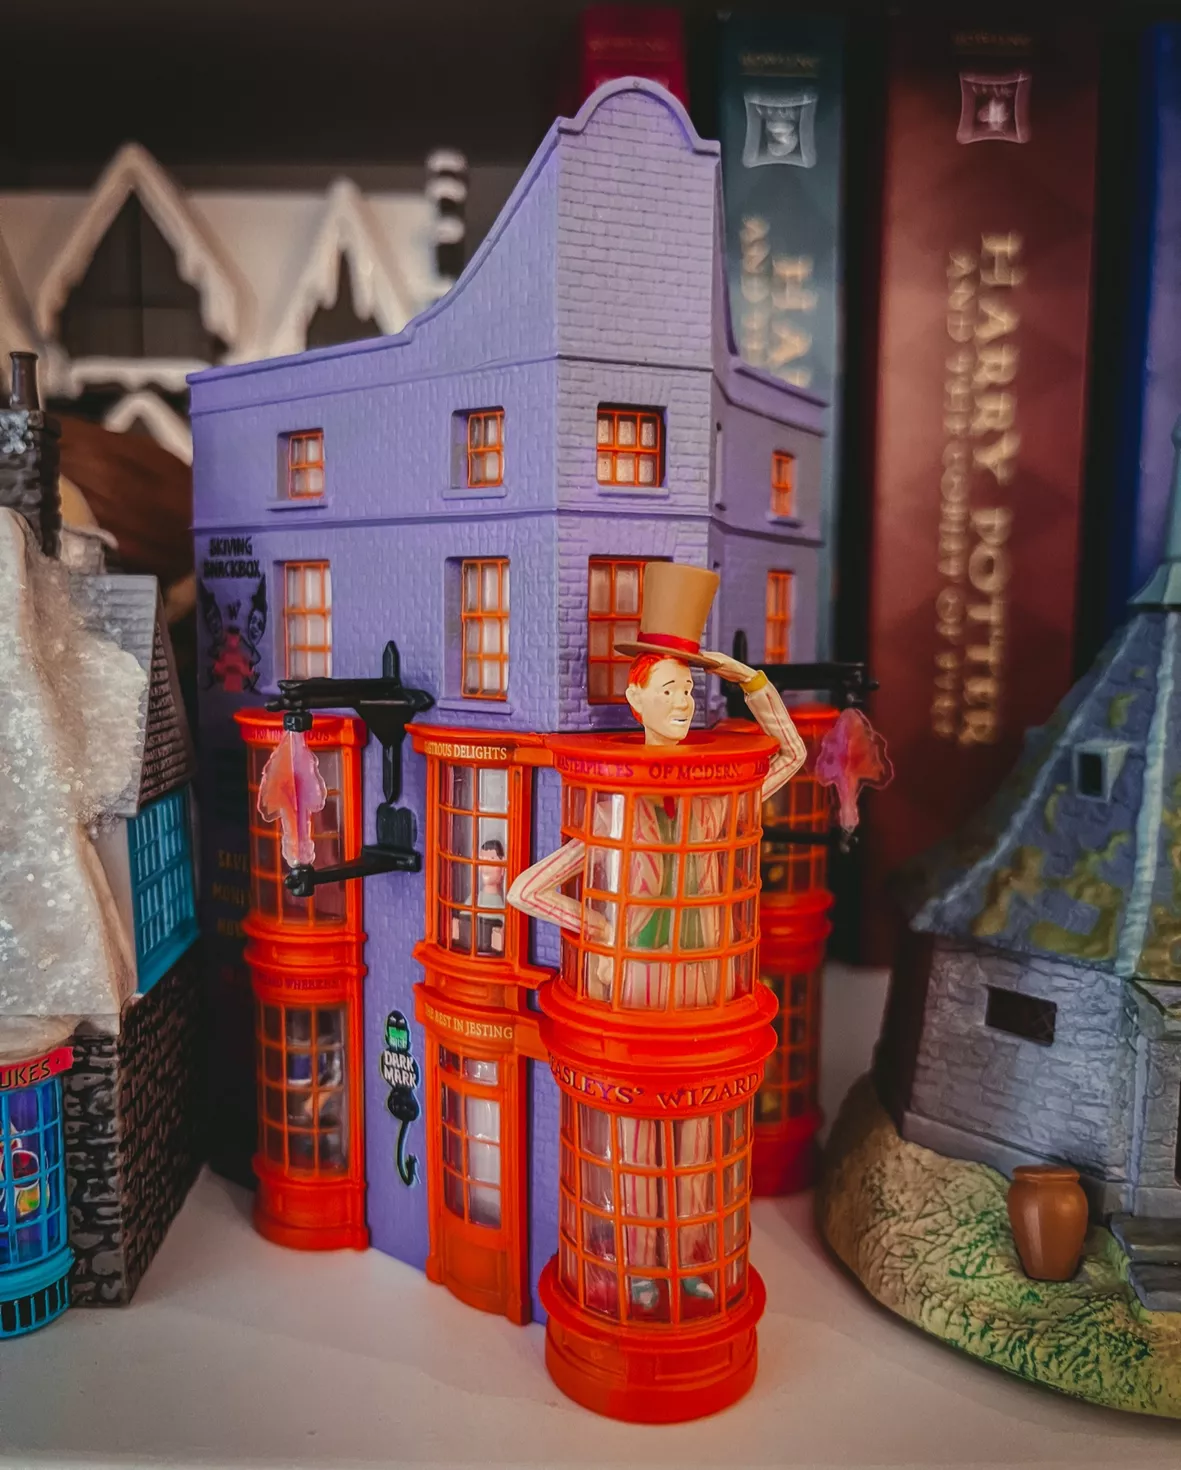 Occasions Hallmark Gifts and More Hogwarts Great Hall and Tower Department  56 Harry Potter Village - Occasions Hallmark Gifts and More